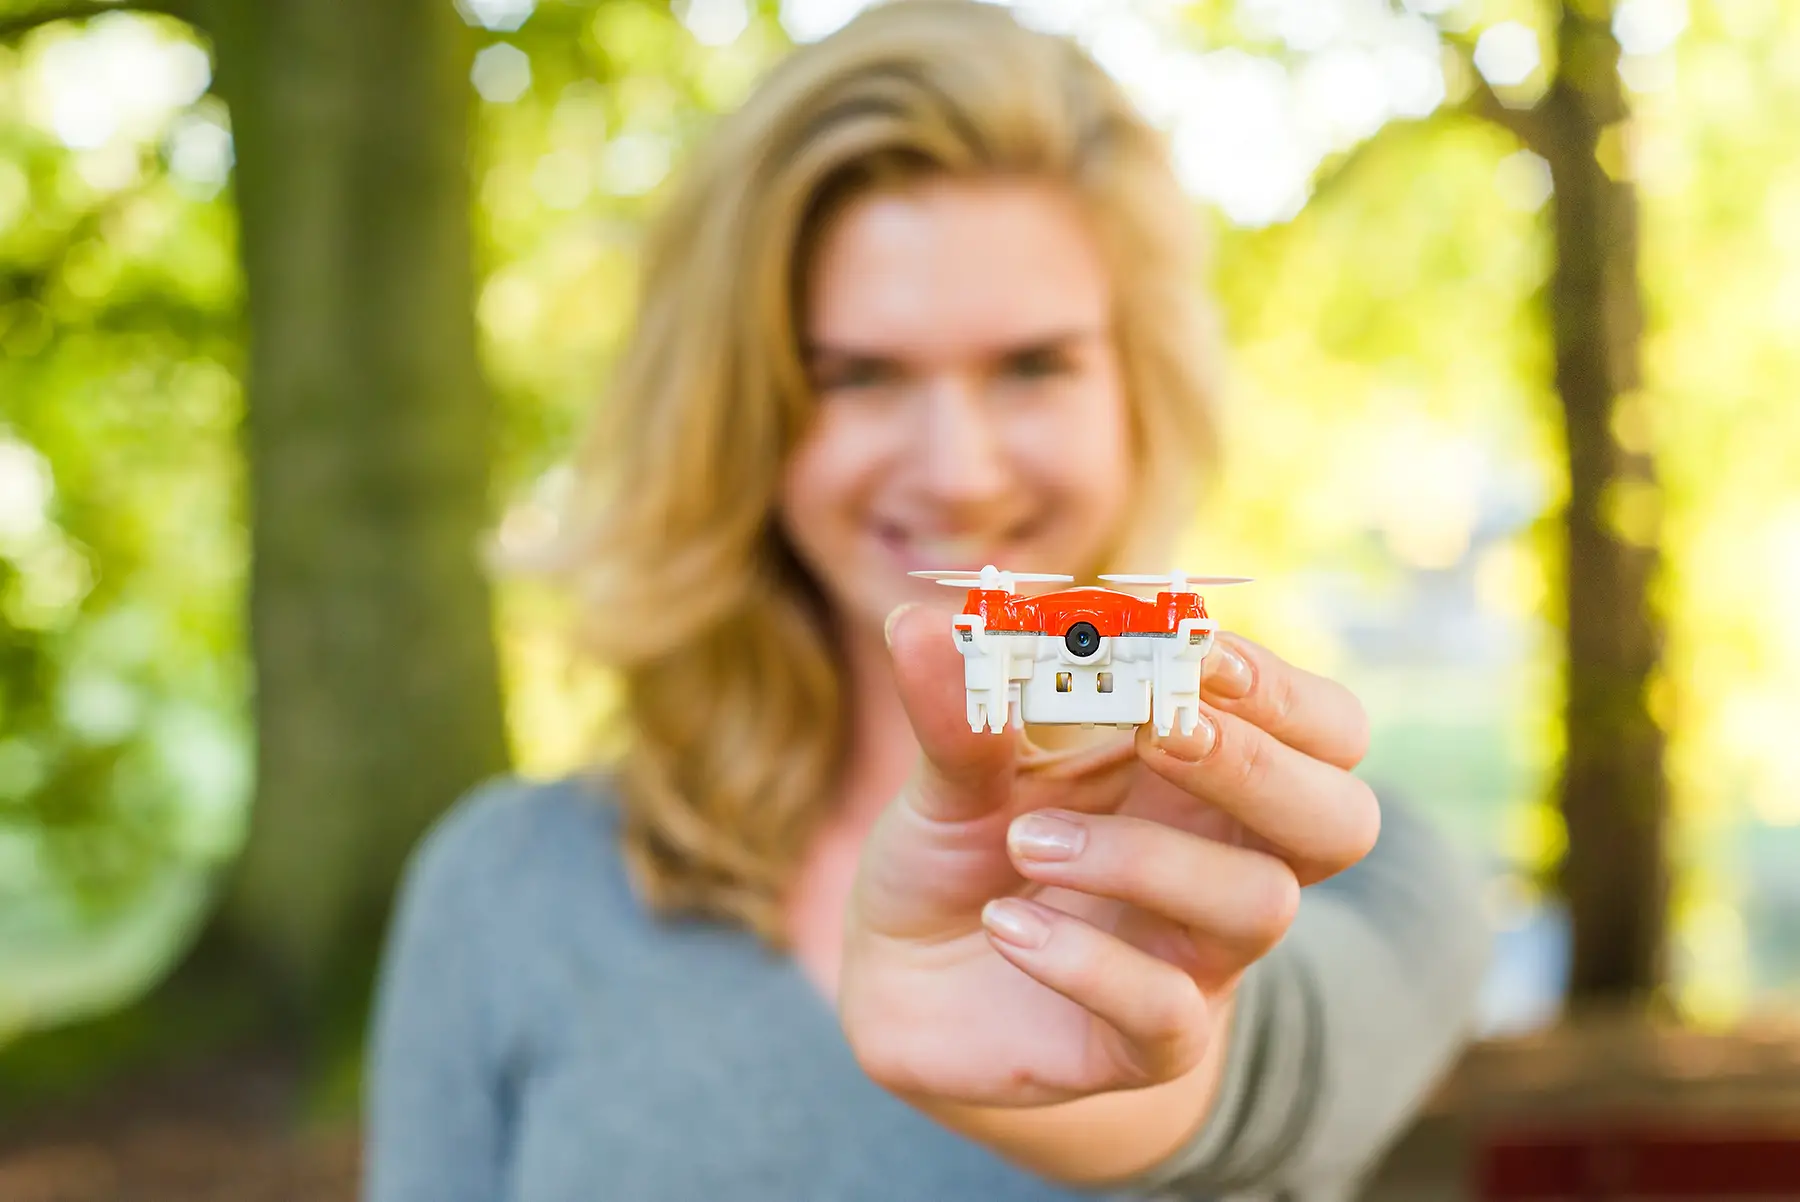 Enter for your chance to win a SKEYE Nano 2 FPV drone, one of the most adva...